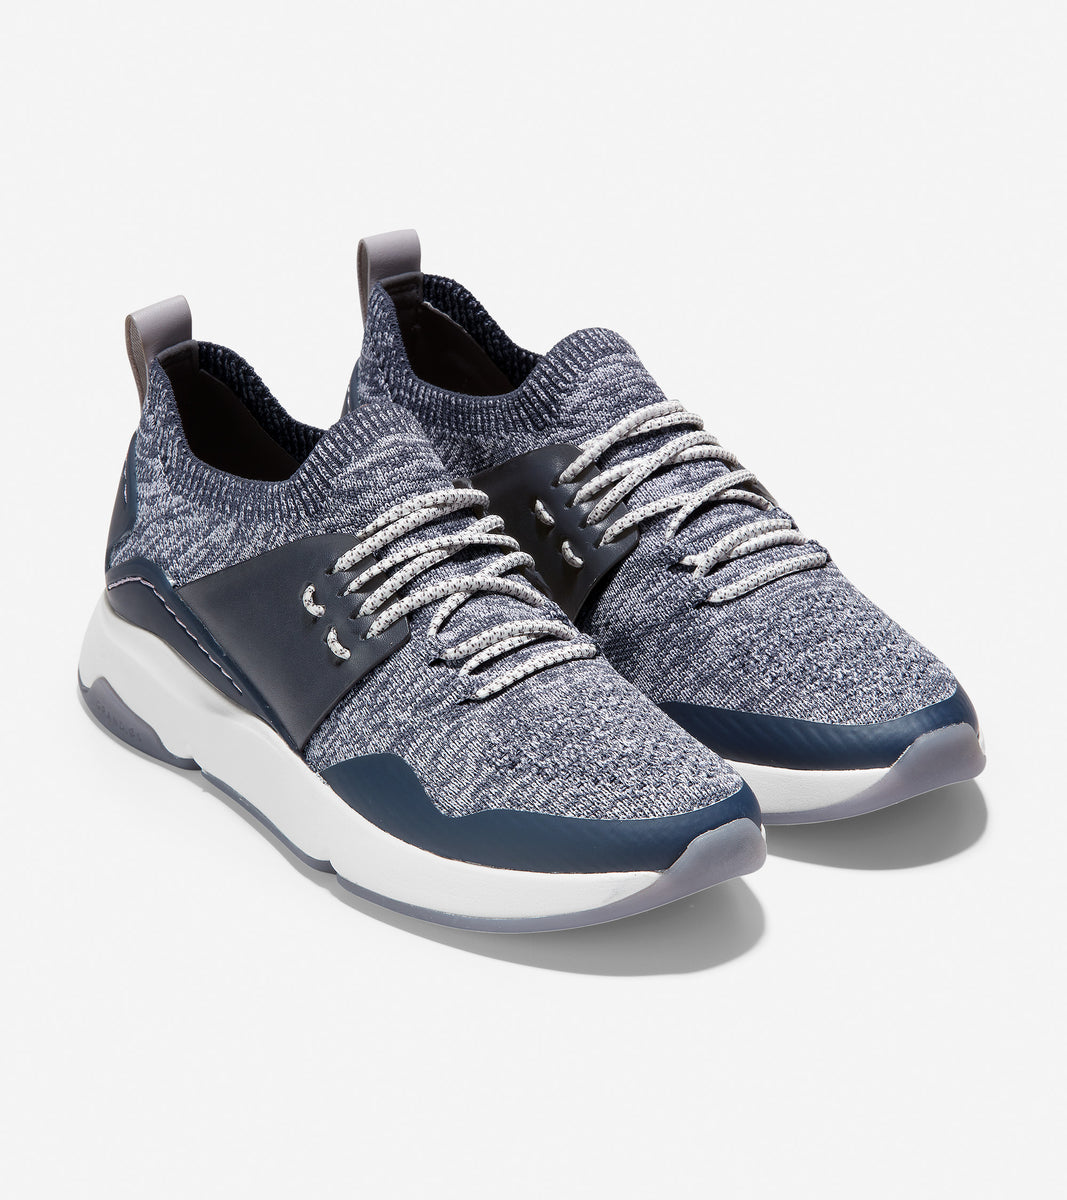 ColeHaan-ZERØGRAND All-Day Trainer-w15474-Ombre Blue Stitchlite™